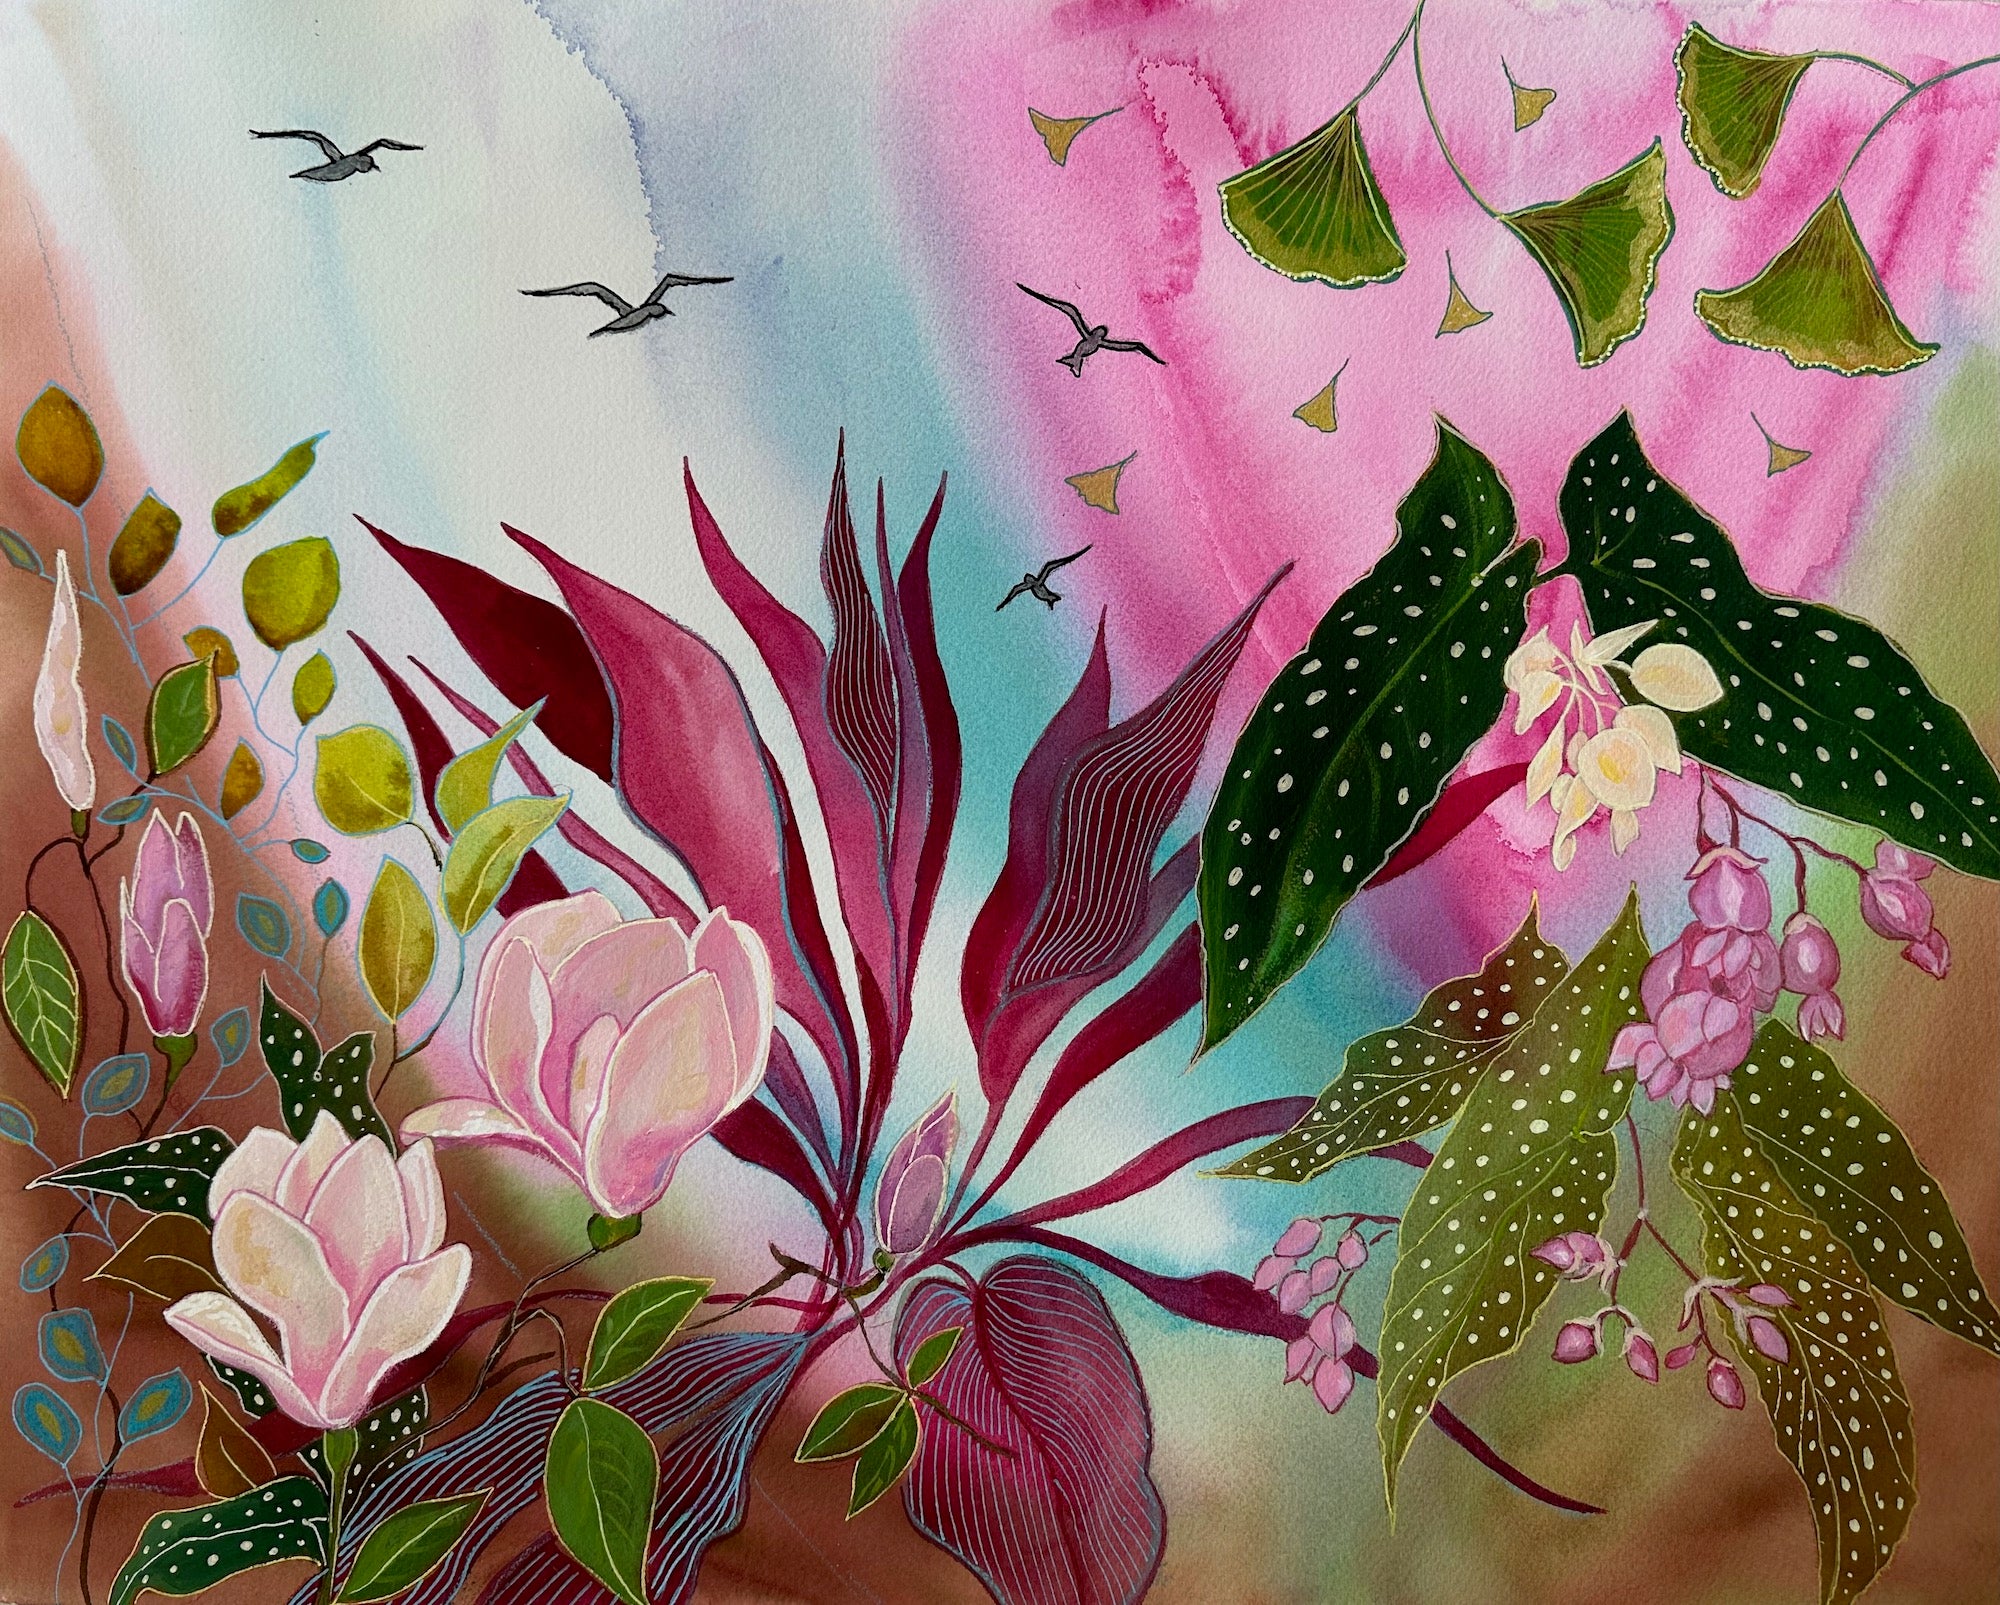 Artwork featuring vibrant pink and aquamarine blue hues, a colorful and eye-catching piece from Aquamarine Design Studio, perfect as a unique art gift, reflecting artistic creativity and suitable for artistic home decor.